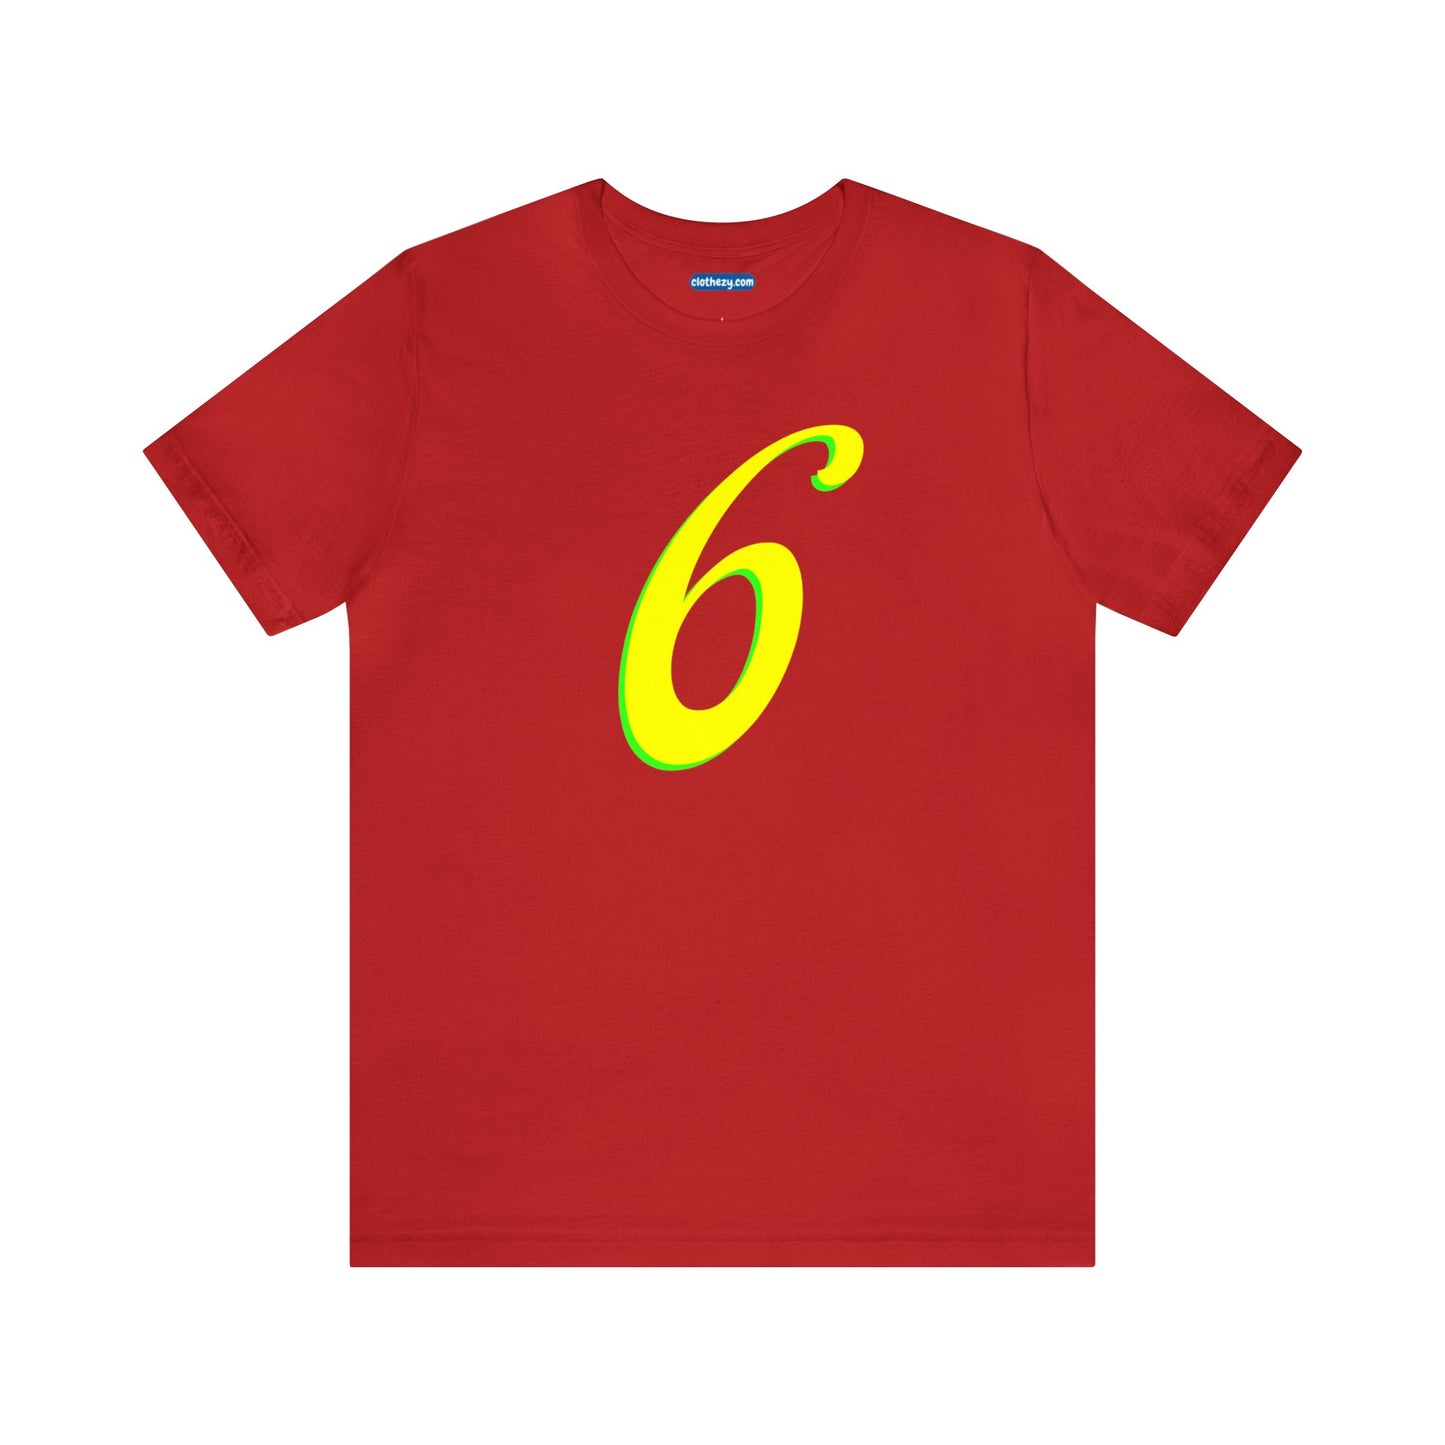 Number 6 Design - Soft Cotton Tee for birthdays and celebrations, Gift for friends and family, Multiple Options by clothezy.com in Purple Size Small - Buy Now